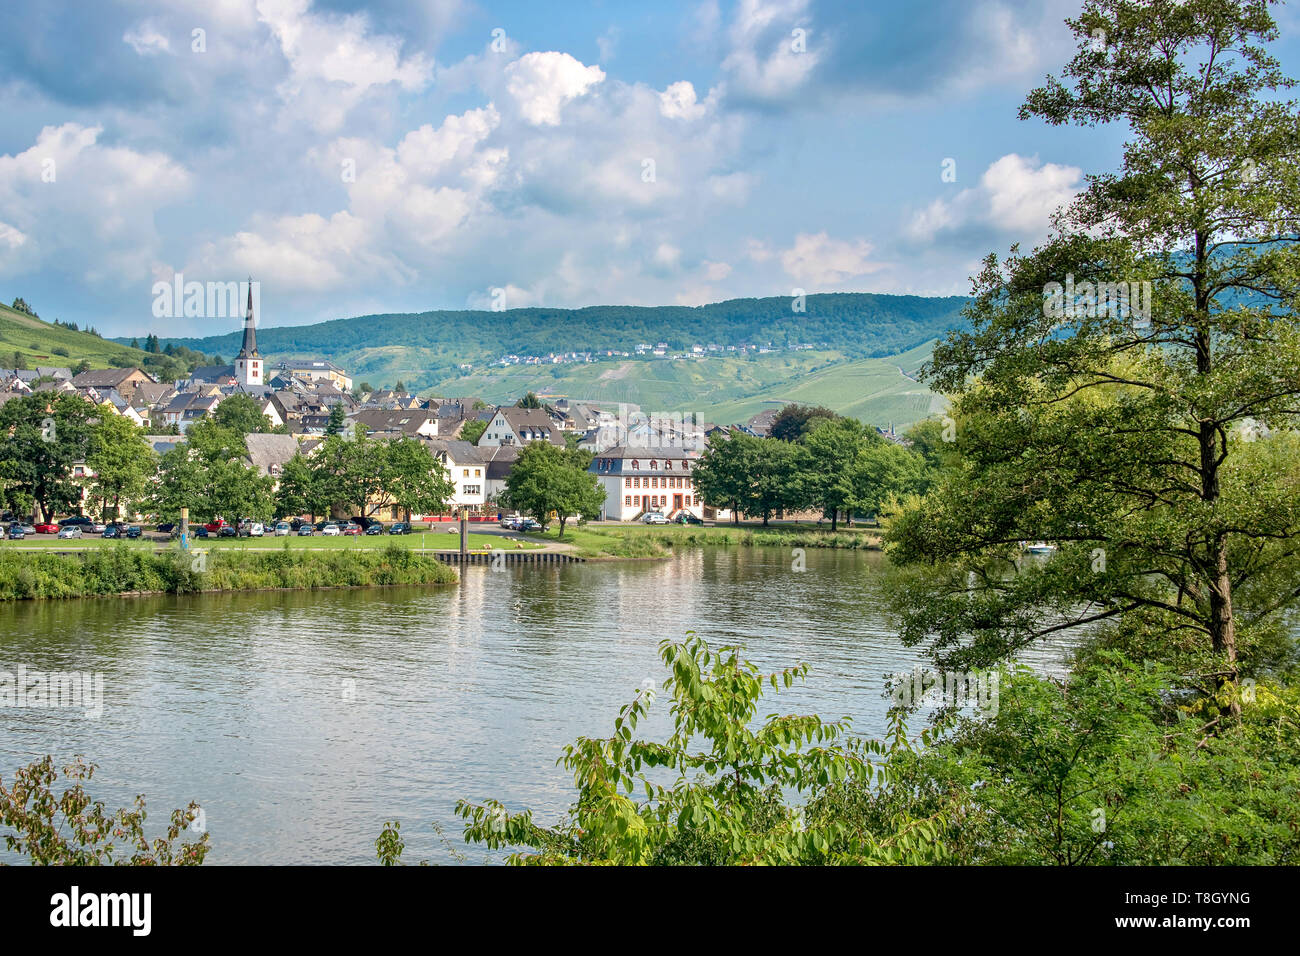 Landscape of the Mosel valley and river with a picturesque village, Germany Stock Photo